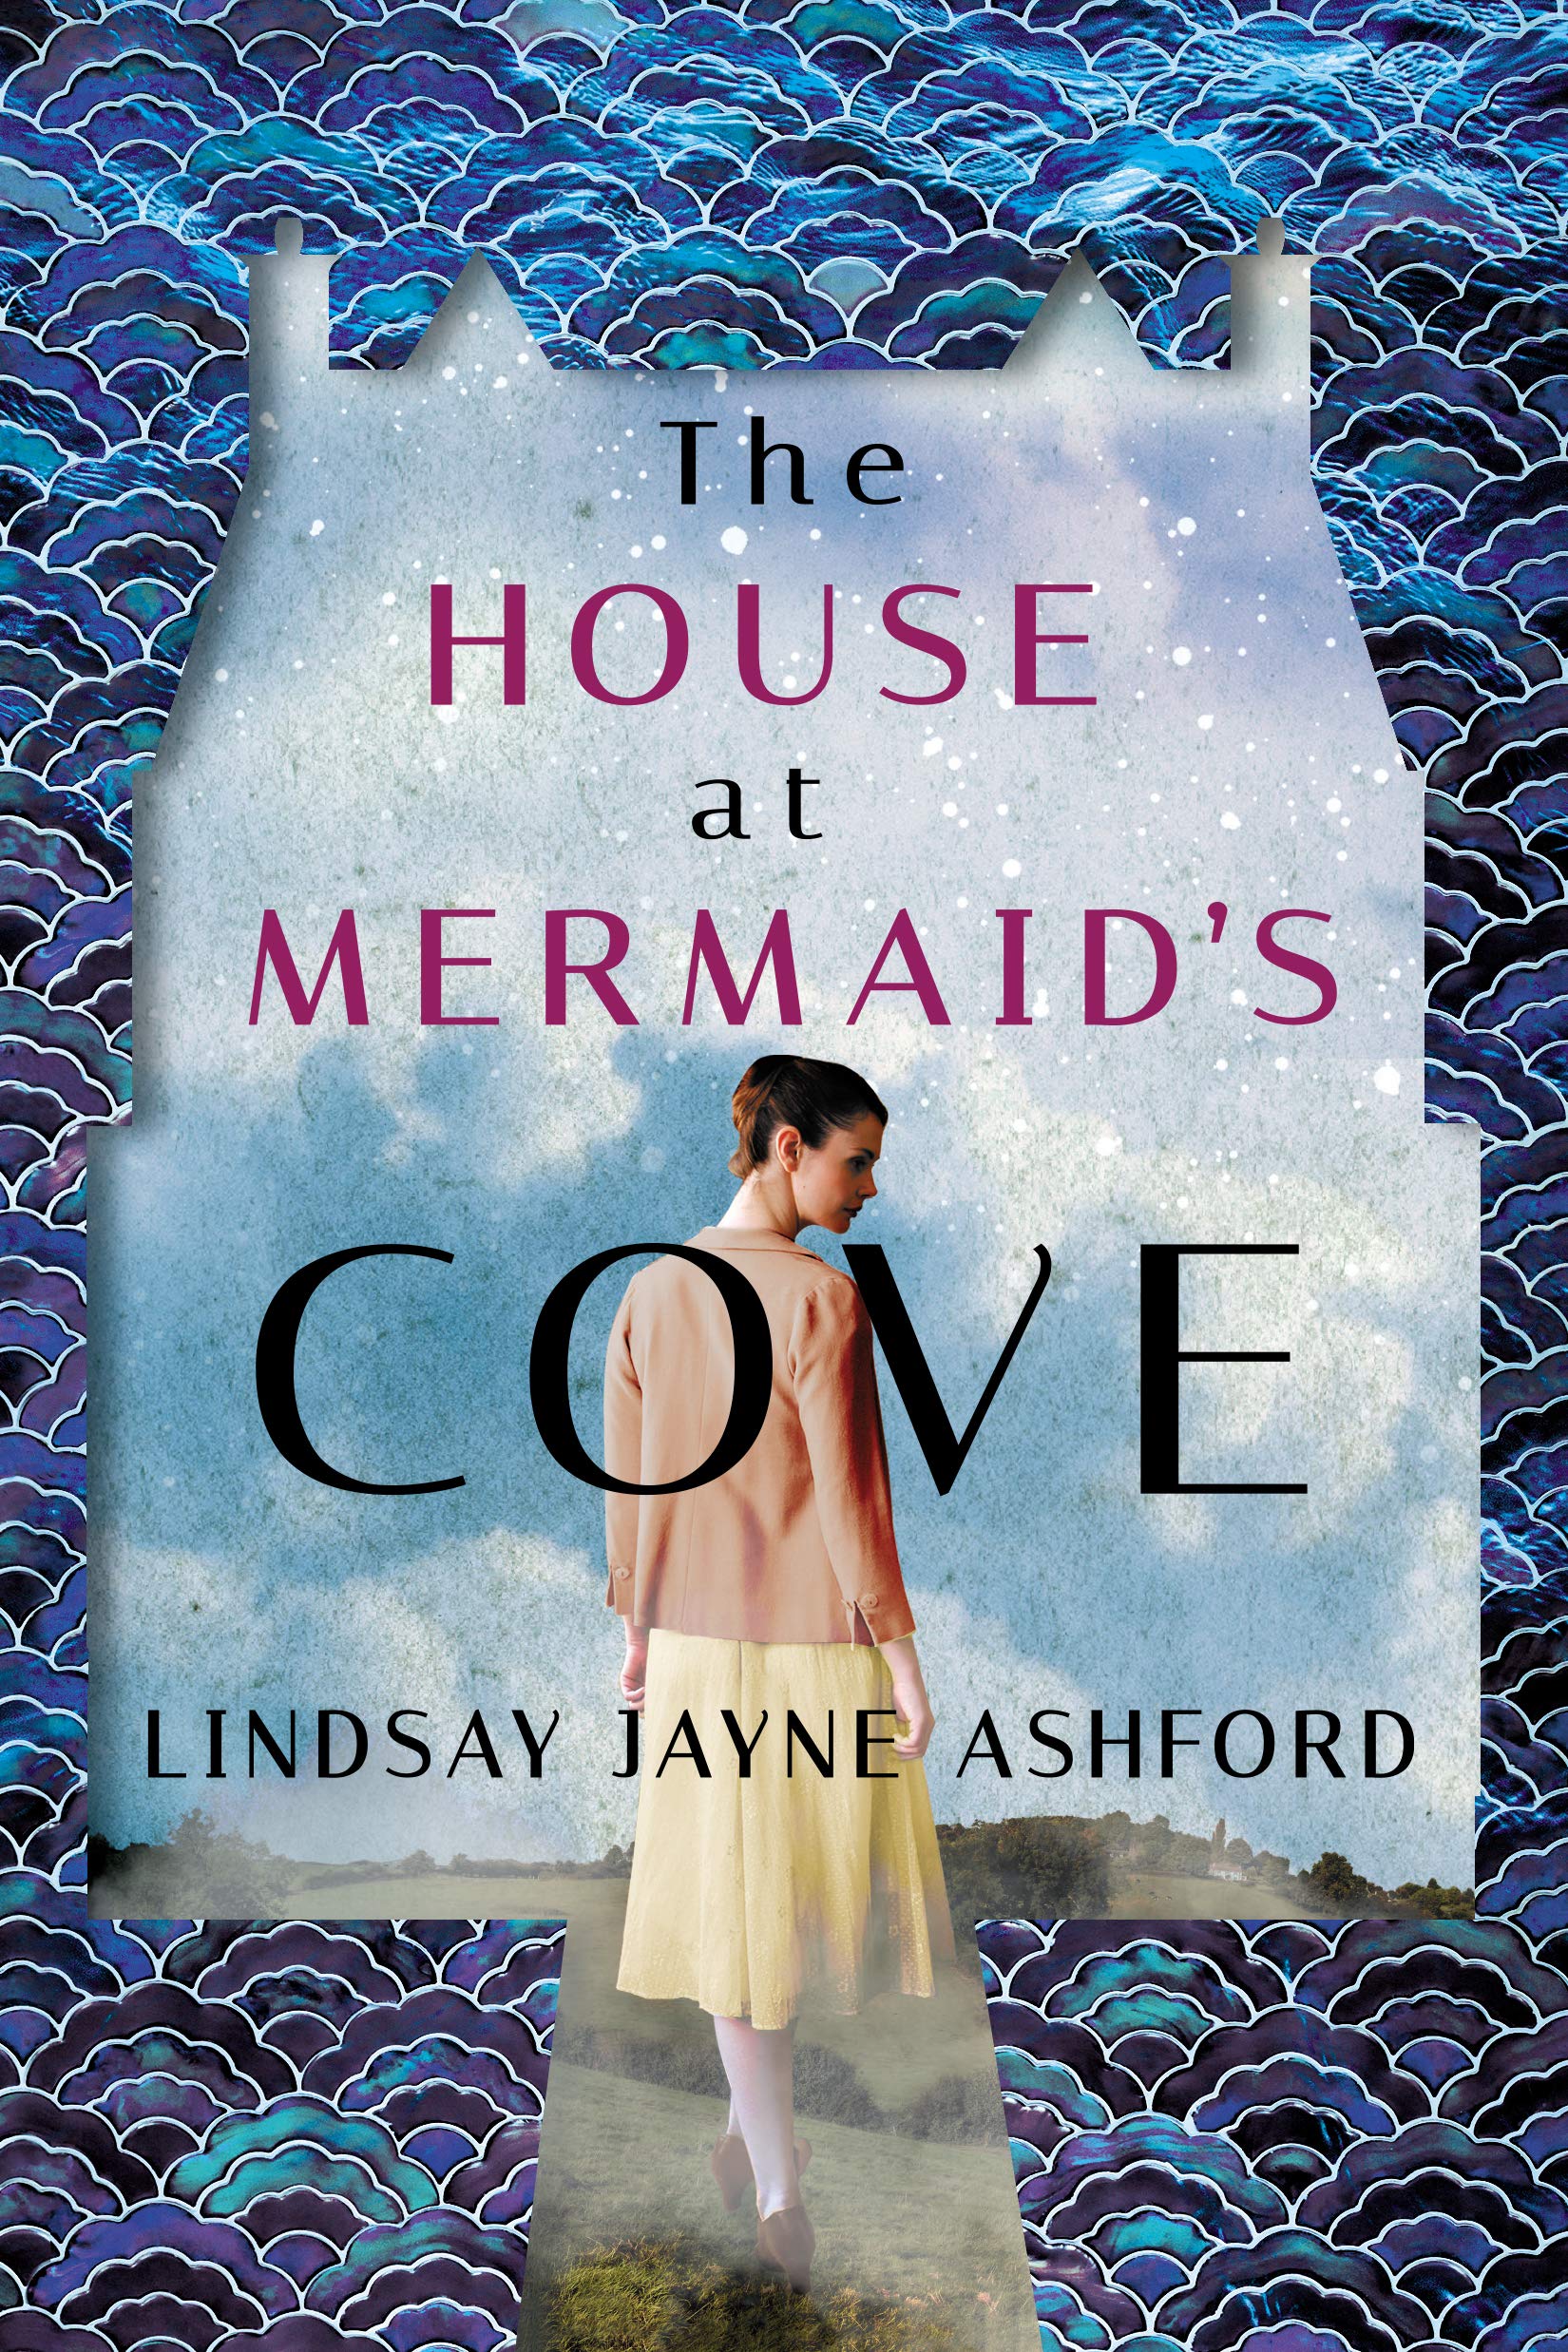 When Does The House At Mermaid's Cove By Lindsay Jayne Ashford Come Out? 2020 Historical Fiction